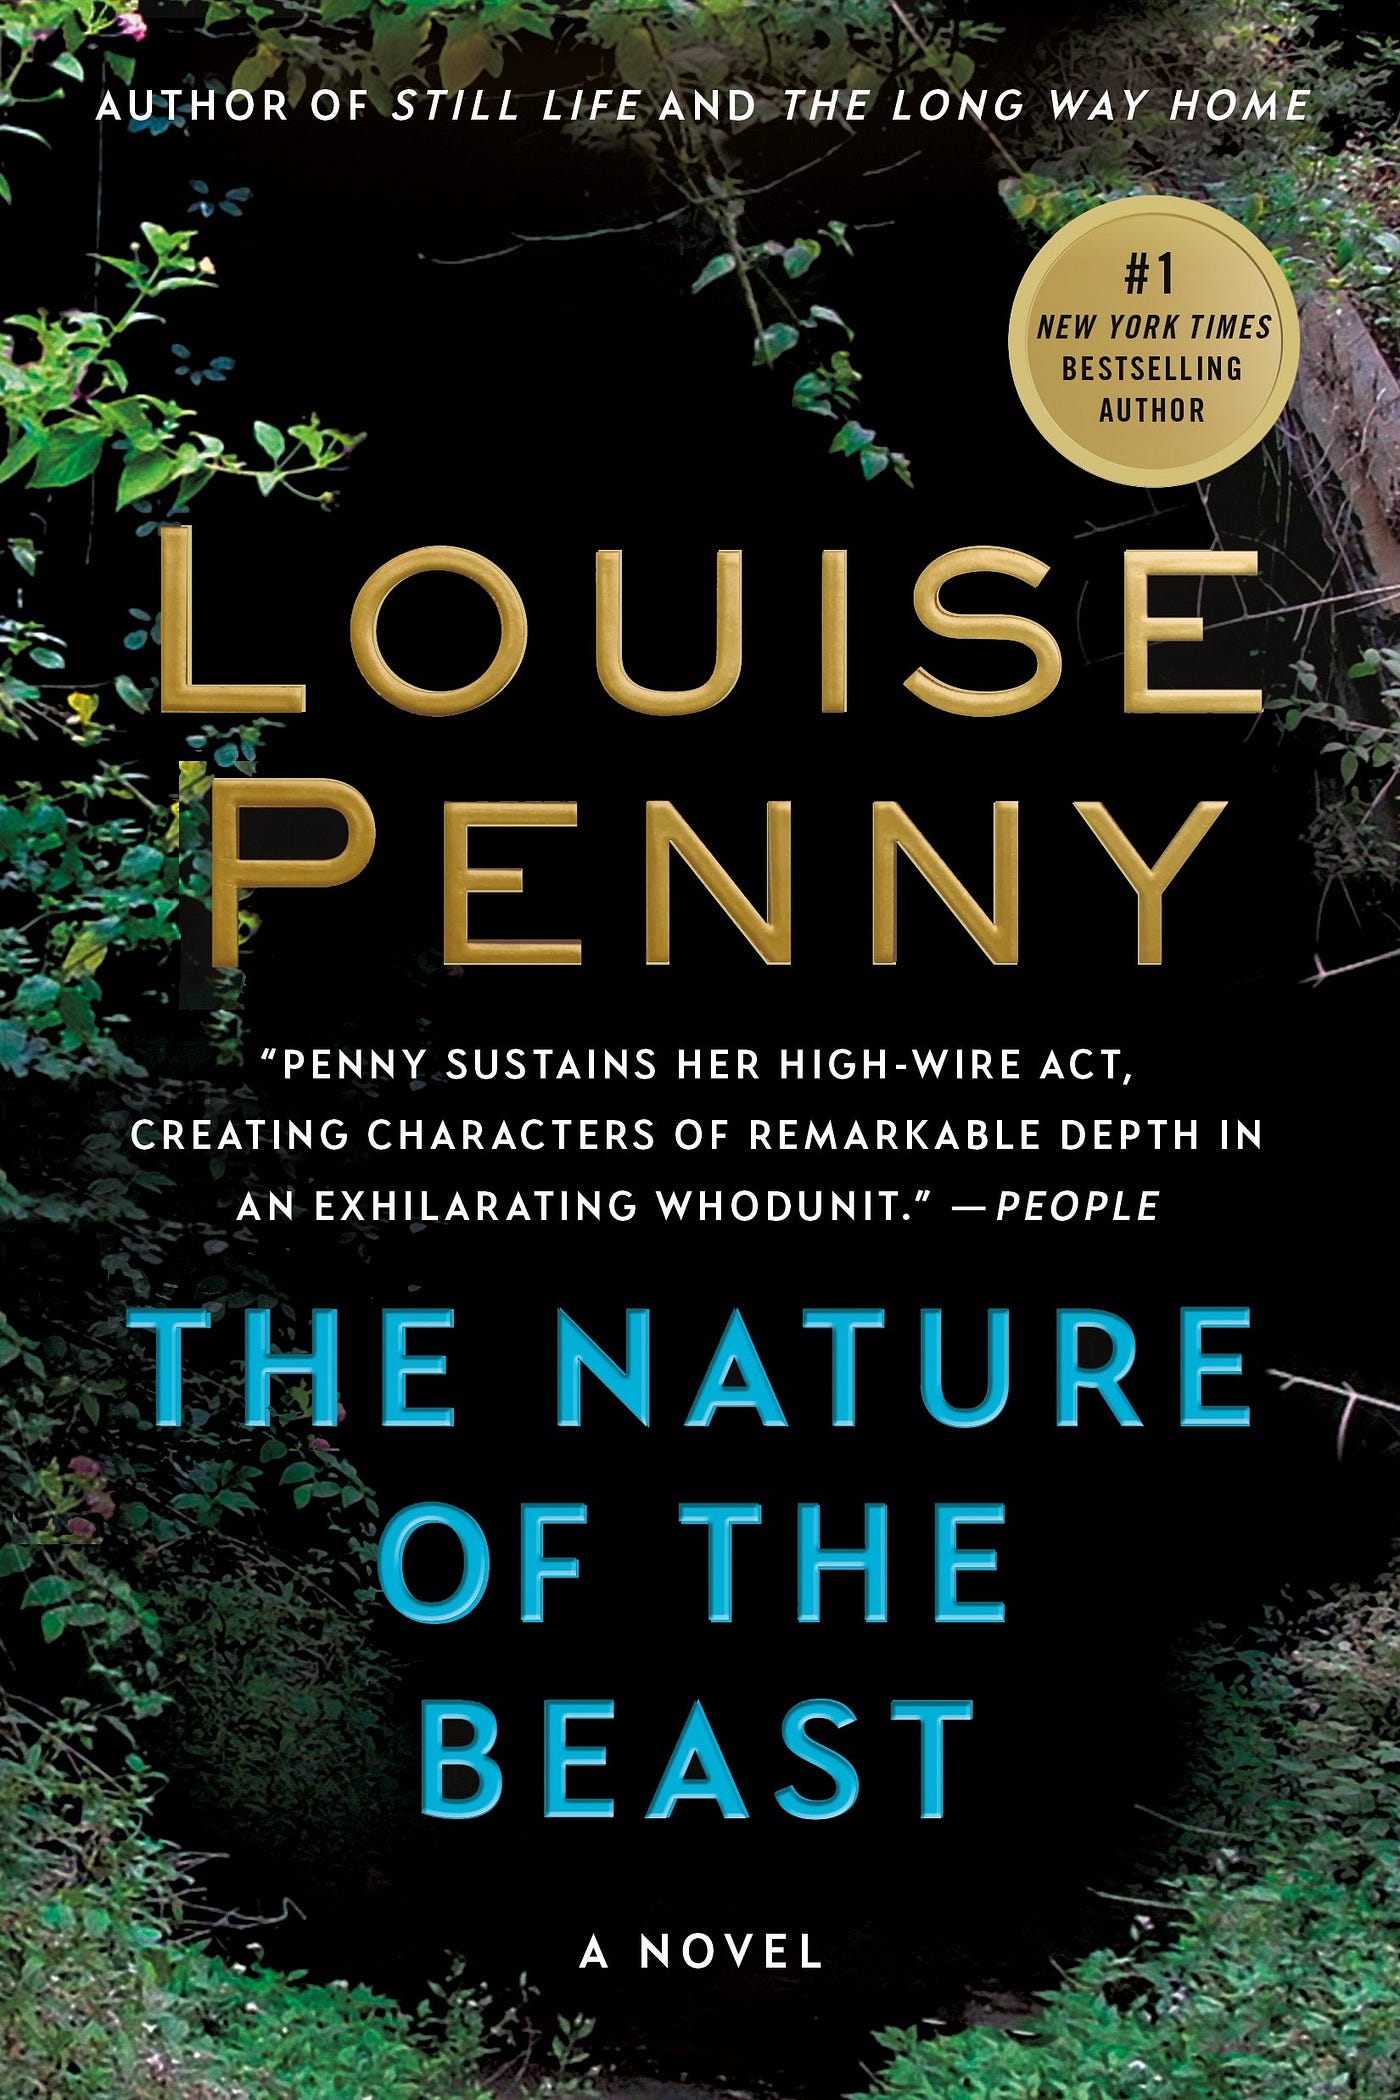 Louise Penny Books in Chronological Order - With Summaries! - Summersville  Public Library